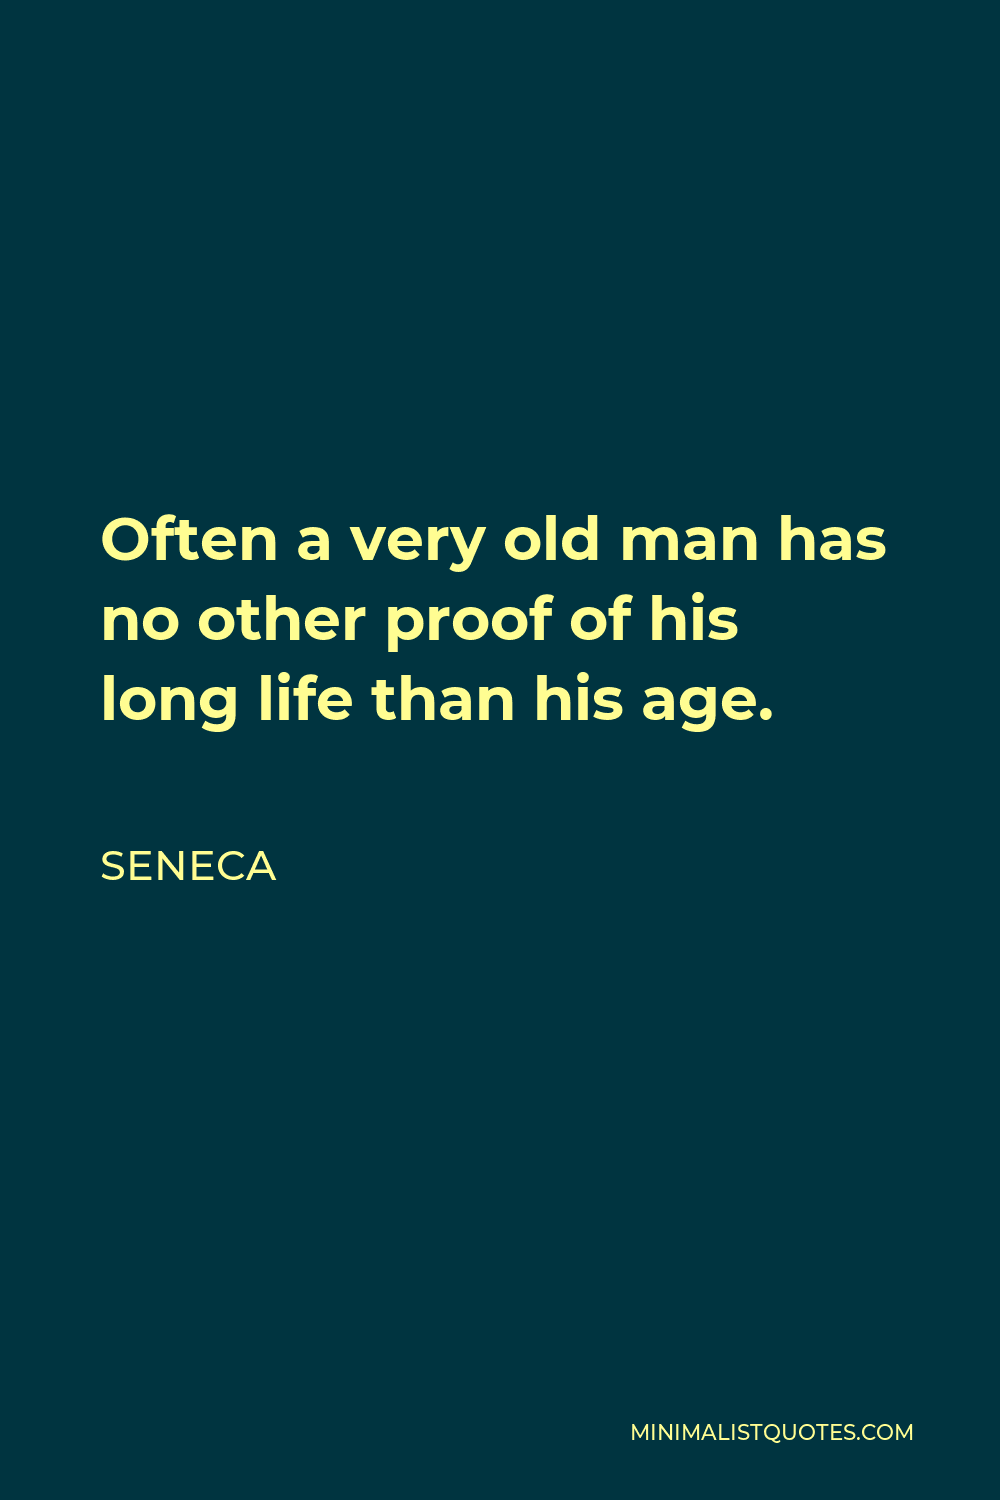 Seneca Quote: Often A Very Old Man Has No Other Proof Of His Long Life Than  His Age.